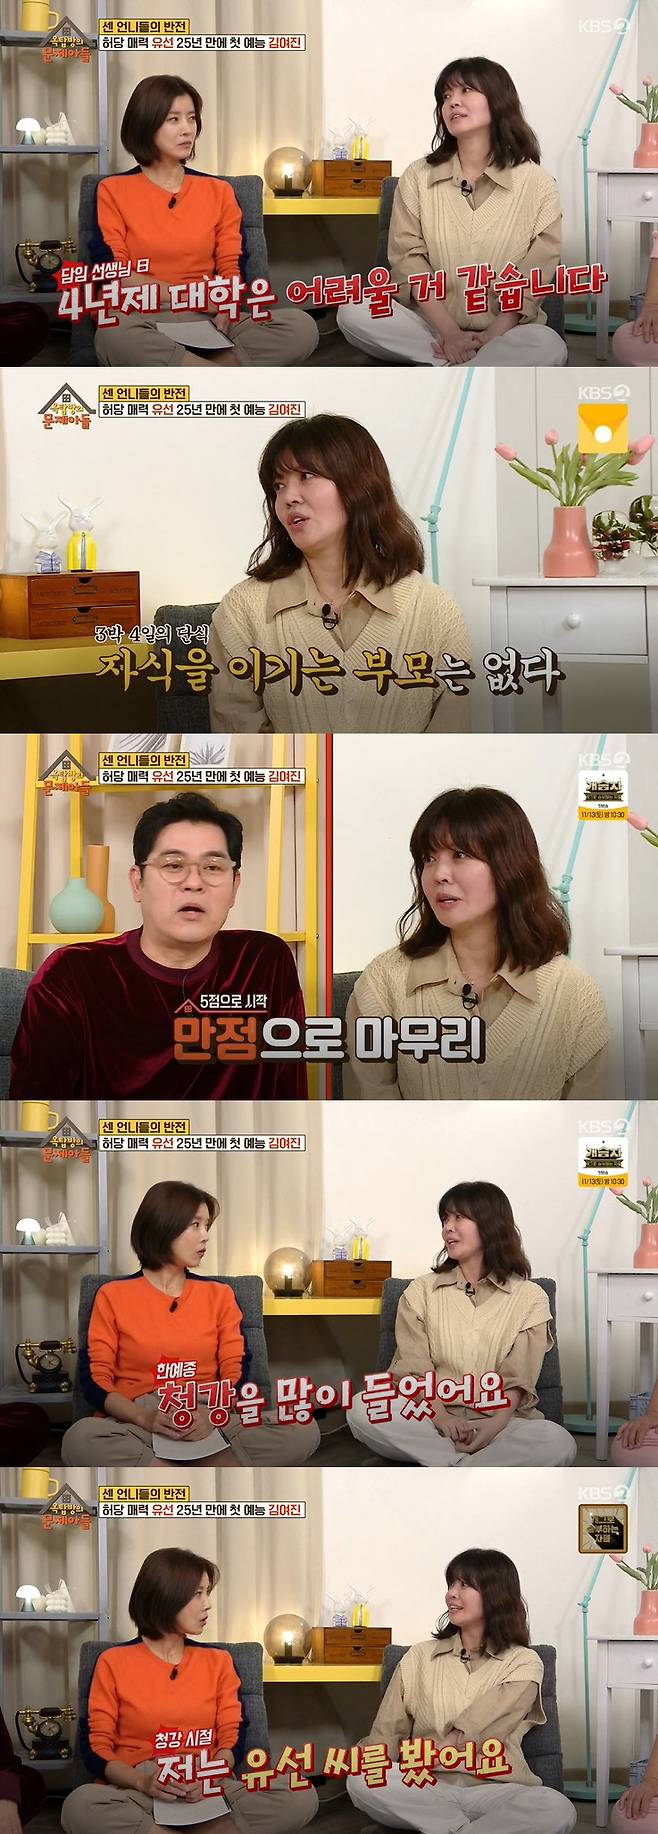 oxmuna Kim Yeo-jin solved his love story with Kim Jin-min PD from the beginning of his college in a year.Actor Yoo Sun and Kim Yeo-jin appeared as guests in KBS2 entertainment Problem Child in House broadcast on the 9th.Kim Yeo-jin Top Model for first entertainment with oxmuna after 25 years of debutKim Yeo-jin said, The reason why I have been doing Top Model in entertainment is that my recent work is human class and binsenzo.I cant see my son because hes ten years old, so I dont know what hes doing when hes at work. I want to show him that hes on TV.Kim Yeo-jin, who showed a villain in the past in Vinsenzo, said he heard a strange word. Vinsenzo comes to our azit after catching the killer who killed his mother himself after his mother died.And when we ended up, everyone called, Did you die? And all my relatives wanted me dead. It hurt a little.From Vinsenzo to Shabala. Kim Yeo-jin said that this word was not an adverb, the writer made it with his heart.At first, I was unfamiliar, but later I followed a lot. Kim Yeo-jin is from Ewha Womens University German and German literature department.Kim Yeo-jin said that Actor had no dream at all. I was preparing for the graduate school exam and went to see Play for the first time in my life.The Play was what does a woman live for? It was so cool. I saw a whole new world. I went to the theater to put a poster for winter vacation. Kim Yeo-jin, who started his life as a theater company for a month, said, I memorized the performance every day without seeing Haru.But the cartoon thing happened suddenly because the main character was not able to come out suddenly because of the good thing. He said, I was spraying water on the stage. He said he had never done it, Ill turn off the lights if I dont raise them. The rest of the Actors were like giraffes.I performed until the end and received a bouquet at the end. After that, Kim Yeo-jin learned the performance for a year.As opposed to Kim Yeo-jin, Yoo Sun has been developing Actors dream since the Elementary School.Yoo Sun said, I have a lot of time alone at home, so I watched TV and applied my mother lipstick.Middle school In the second grade, I decided to become an actor after being impacted by Park Jung-jas Play. Play audition continued to fall.I was cast as an MC in KBS movie program when I got to work on a corner in the Internet broadcast. The two had an extraordinary relationship with Hwang Jung-min; Kim Yeo-jin was a junior at Elementary school at Hwang Jung-min.Yoo Sun had a relationship with Hwang Jung-min in a film called Black House. Yoo Sun said, I was fiercely shot while suffering from each other and took a lot of money because I was from the same theater.He was a carpenter, so he always recommended me marriage, and when I was marriage, I told him first and asked him to celebrate.I also invited the accompanist directly, but he went to the service to perform the performance and to meet the accompaniment. This wasnt the only one. When I was giving birth, she came to the kitchen with my wife.He was the one who took care of him like his brother when there were important things in life. Kim Yeo-jin is a couple of 18 years of Kim Jin-min PD and marriage who directed Netflixs Human Class and My Name.I didnt mean to meet him, but he called me to eat. He was a different type of person than his favorite.However, one thing that was okay was that the person was rough, swearing a lot, and it was a lot of big, but it rained on the day of shooting the group god.I was waiting on the spot because it took time to gather and gather, he said. I was covered with an umbrella, but the assistant performers were getting rain.At that moment, I wanted to be different from what I was looking at.But I was wondering about the first meeting, I told them about the women I had met so far. I thought I was comfortable.Hes been a day since Agnaldo Timóteo. He showed me everything. I wanted to meet him.I marriage after eight months of dating - I really pushed, she recalled.Yoo Sun also met Kim Jin-min PD through his work. Yoo Sun praised the field control is enormous, pleasant, bright and energetic.Kim Yeo-jin said of Husband: Im really fit; I cant sleep in Haru for more than three to four hours in my final supporting role.But since I decided to go out, Haru has come to see me without me. I called at 3 am and asked him to come out for a while.Kim Yeo-jin passed Ewha Womens University in a year; Kim Yeo-jin said, I did some studying when I was in Middle school.I went to high school and played a little bit and puberty came a little hard. My parents told me to go to Primate body rice to become a doctor.In the second semester of the second year, the teacher said that it would be difficult for a four-year college. Kim Yeo-jin said, At that time, I was in German literature and I decided to major in reading literature.I declared that I would study if I moved to Doors and my parents. My father did not eat for 3 nights and 4 days, but eventually I won and went to Doors and.At school, the second foreign language was French, and I declared that I would study German. At first, I was 5 points, but I got a perfect score in the academic examination. But Kim Yeo-jin said, I wanted to go to Han Ye-jong too much by opening my eyes to the smoke. My friend who was playing with me was Moon Jung-hee, but he was different from me.I went to the professor and got permission and listened a lot. At that time, I saw Mr. Yoo Sun. 